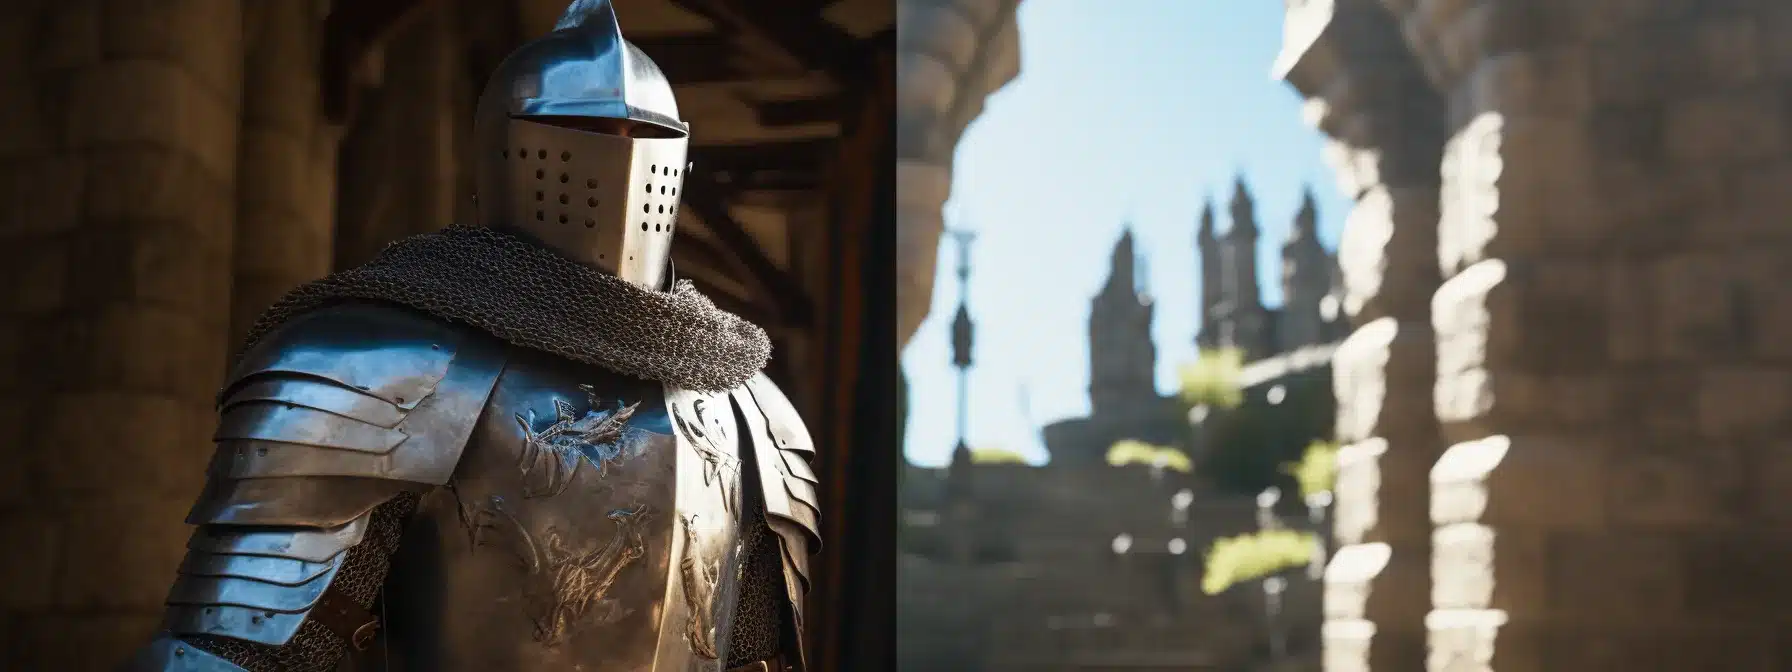 A Knight With A Shield And Sword Protecting A Castle.